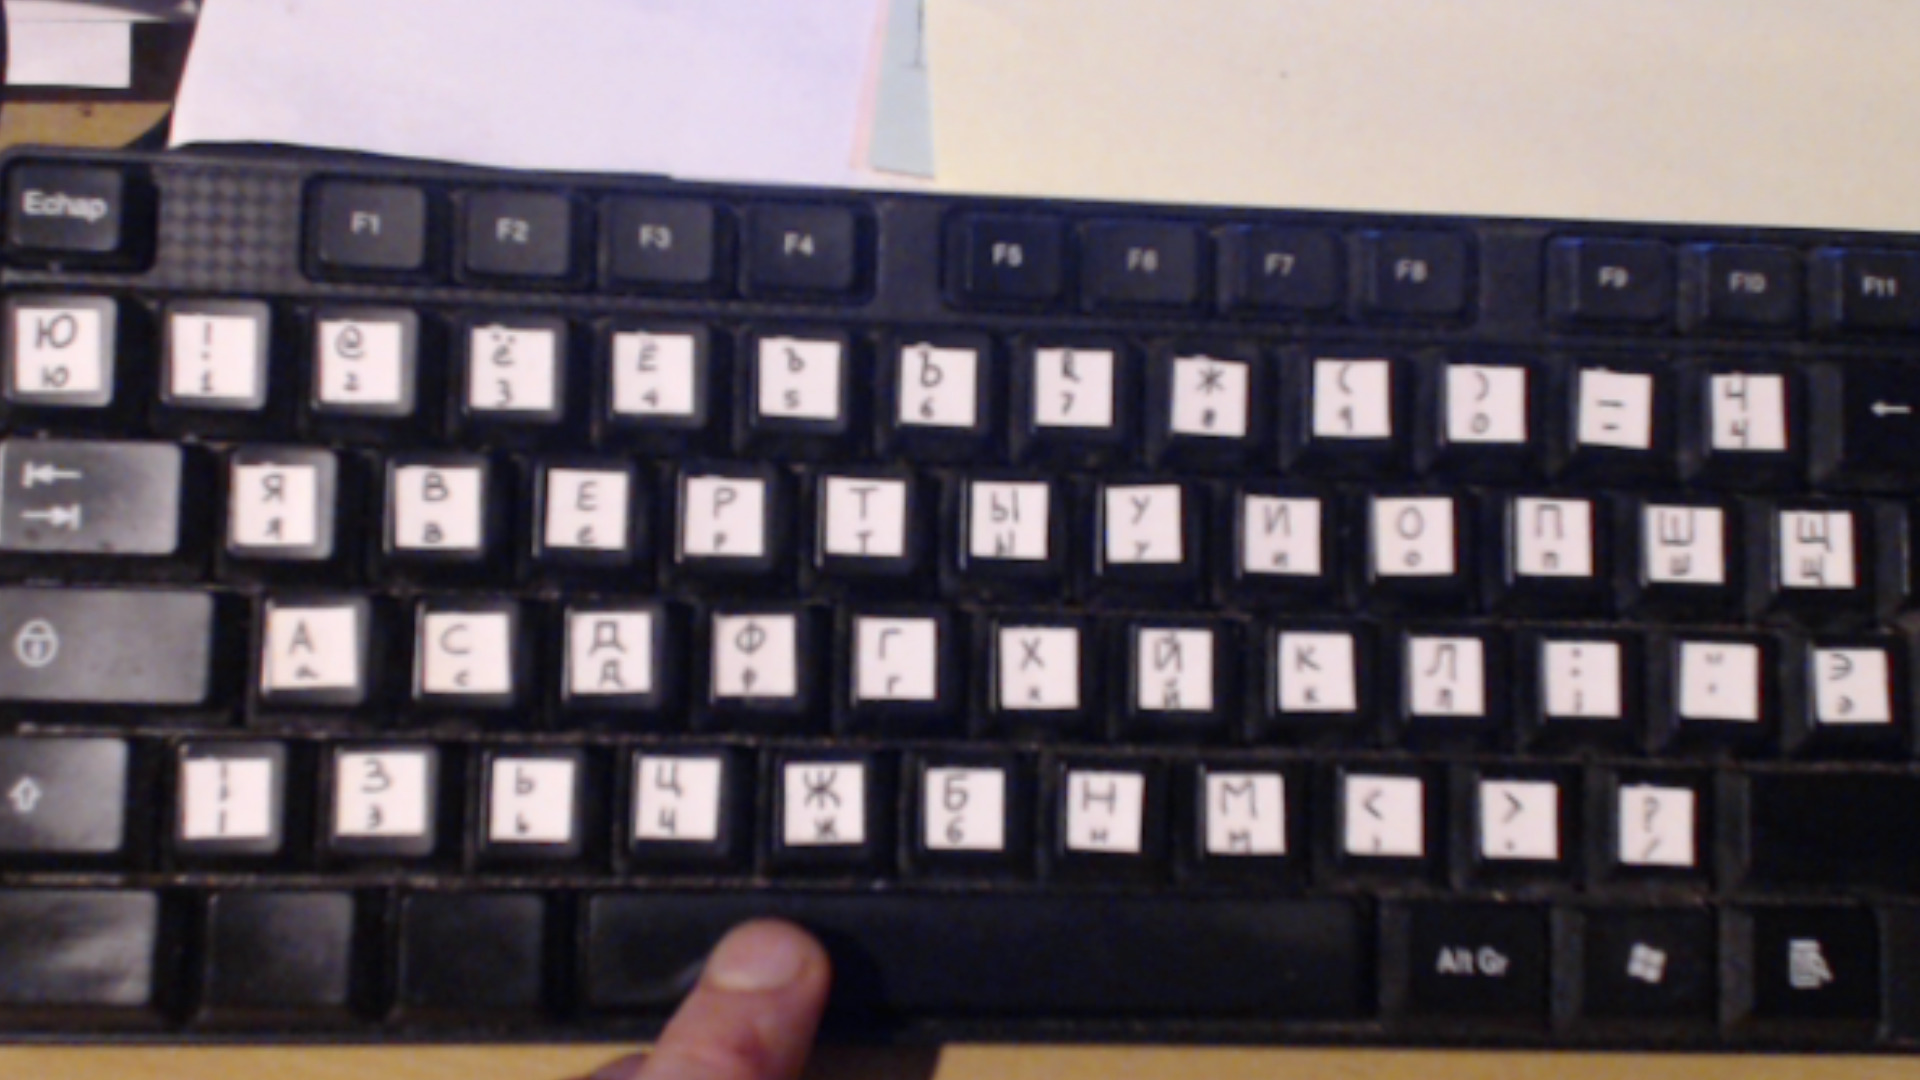 My hand-made Russian (phonetic) keyboards, image 1 of 14